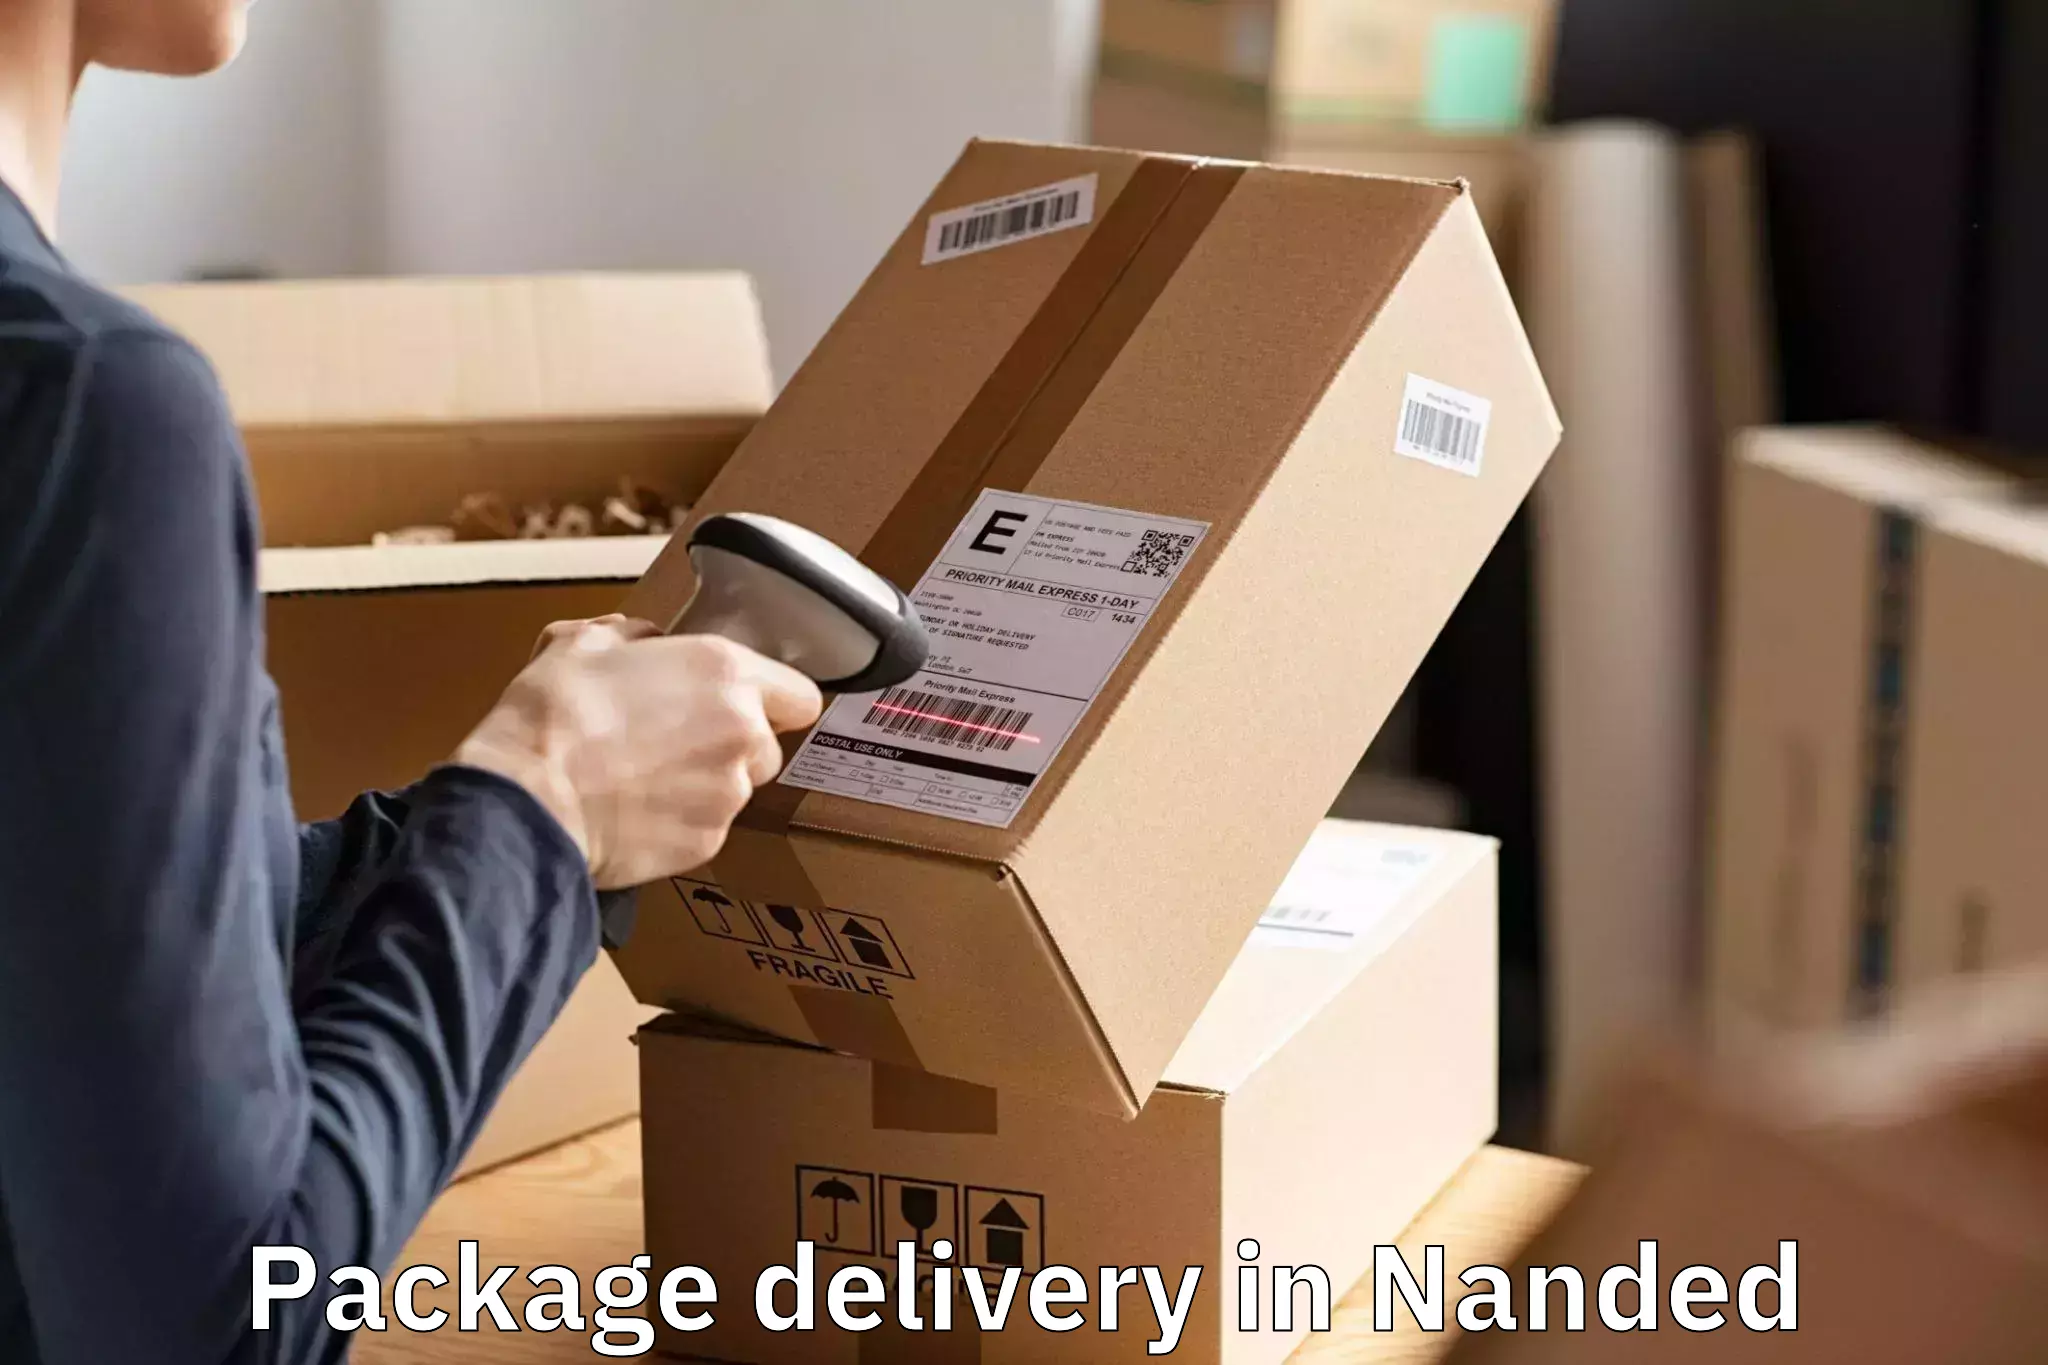 Comprehensive Package Delivery in Nanded, Maharashtra (MH)